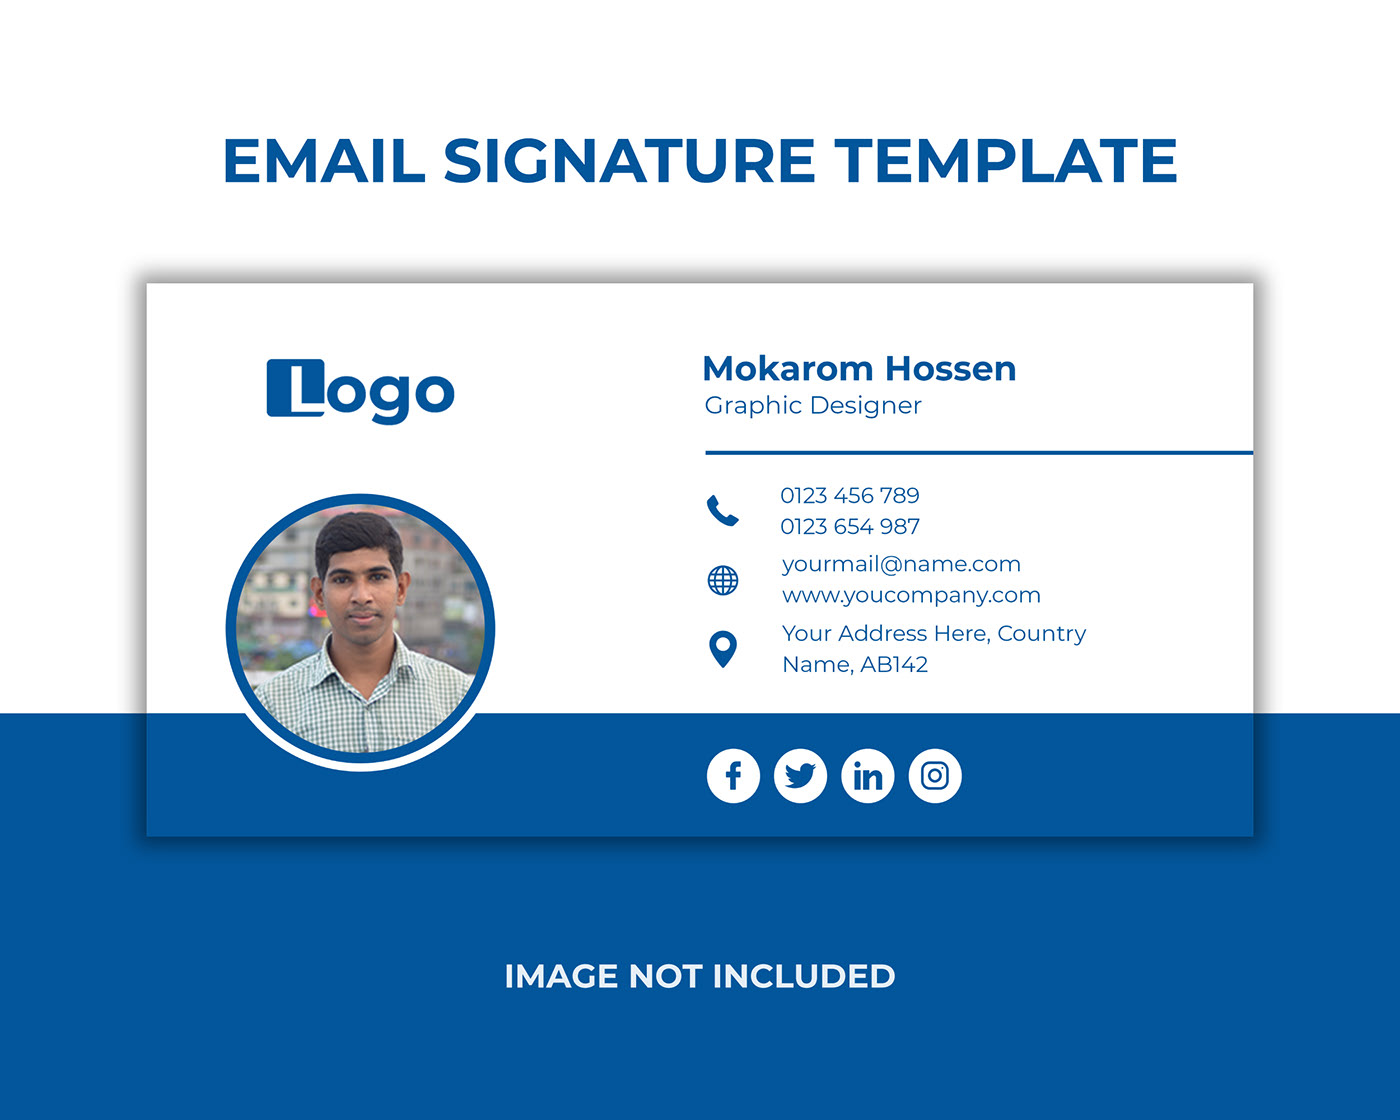 Email Signature Template on Behance